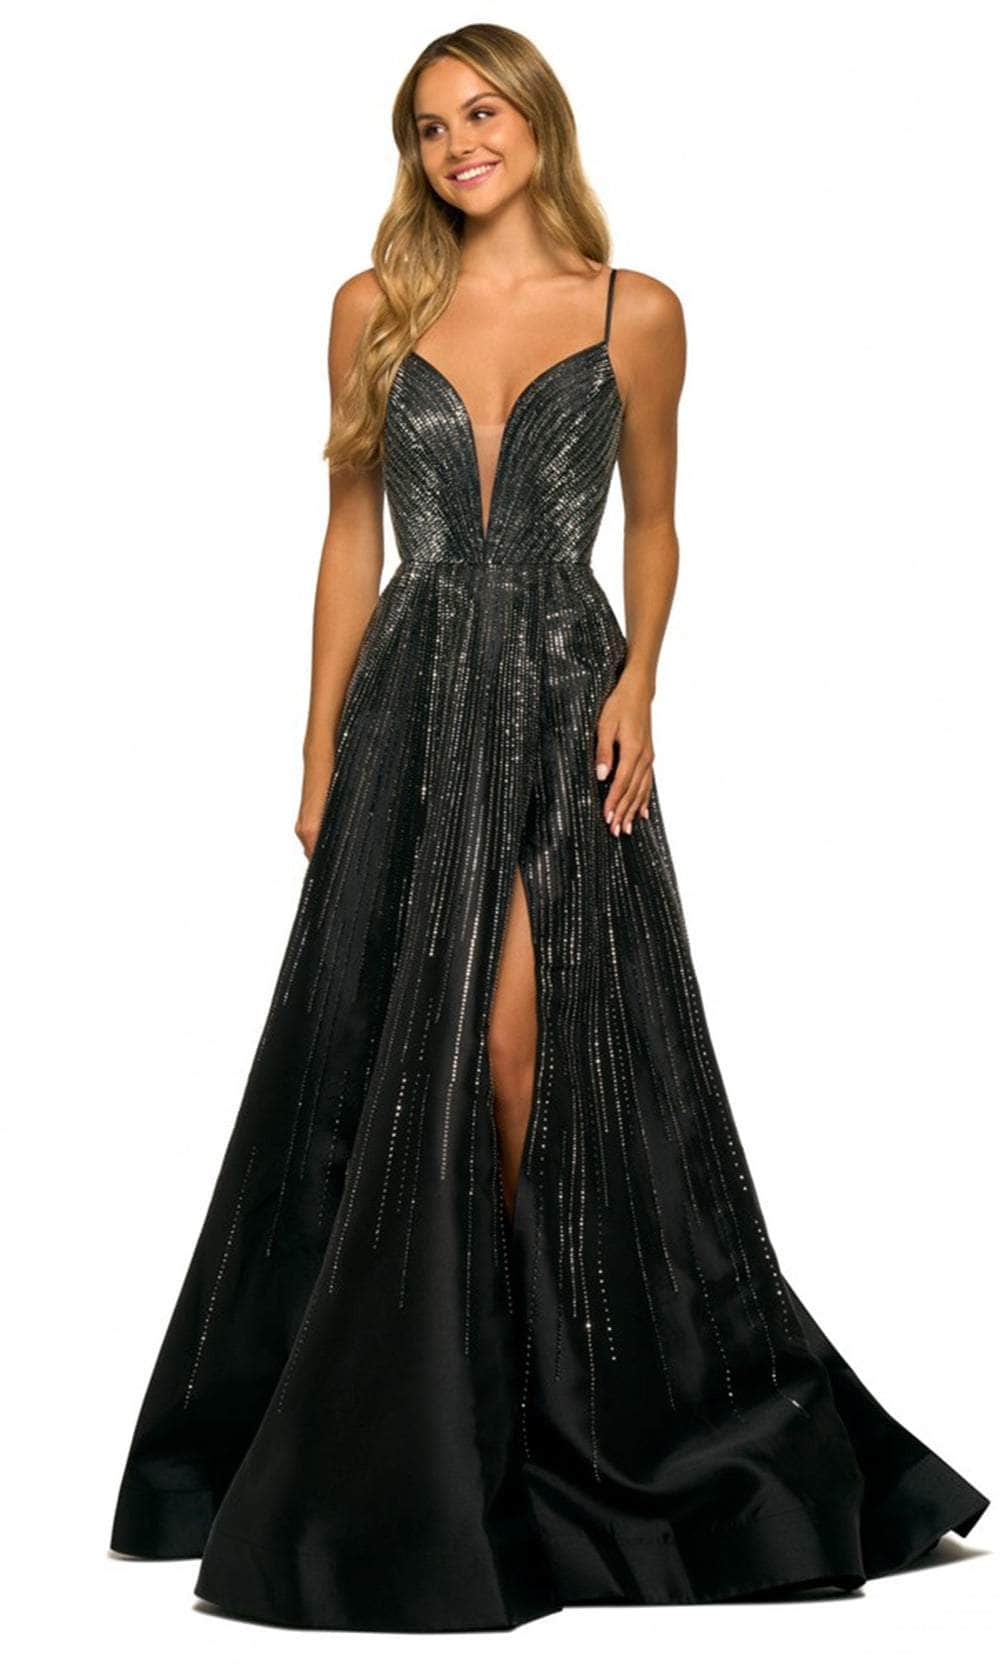 Image of Sherri Hill 55505 - Sleeveless Plunging V-Neck Evening Gown